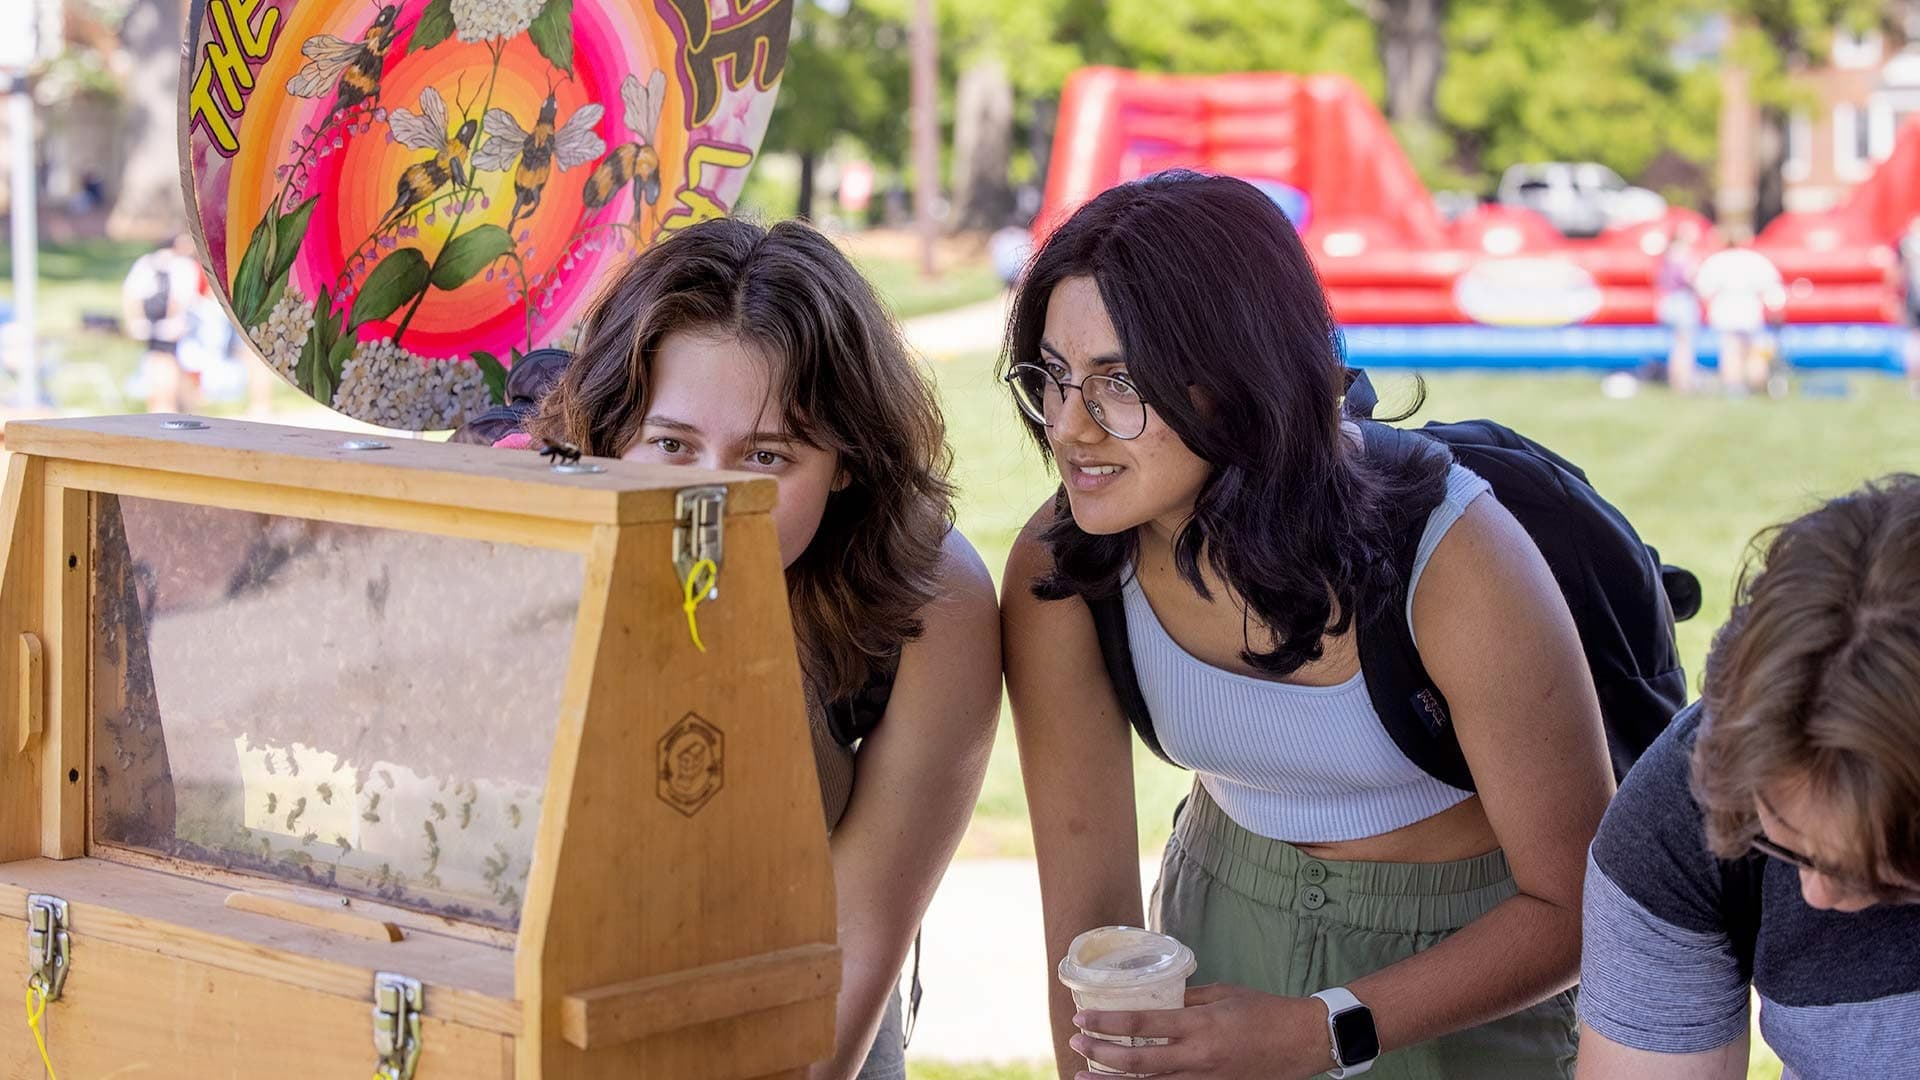 Natalie Wathen ’26, left, and Amudha Krishnan ’26 look for the queen bee in a beehive presented by UMD’s Honey Bee Lab. “Our campus just became a pollinator campus, which is a really big deal because it means we’re working toward making sure our campus is safe for pollinators,” said Kensie Olson ’22, a technician in the Honey Bee Lab.